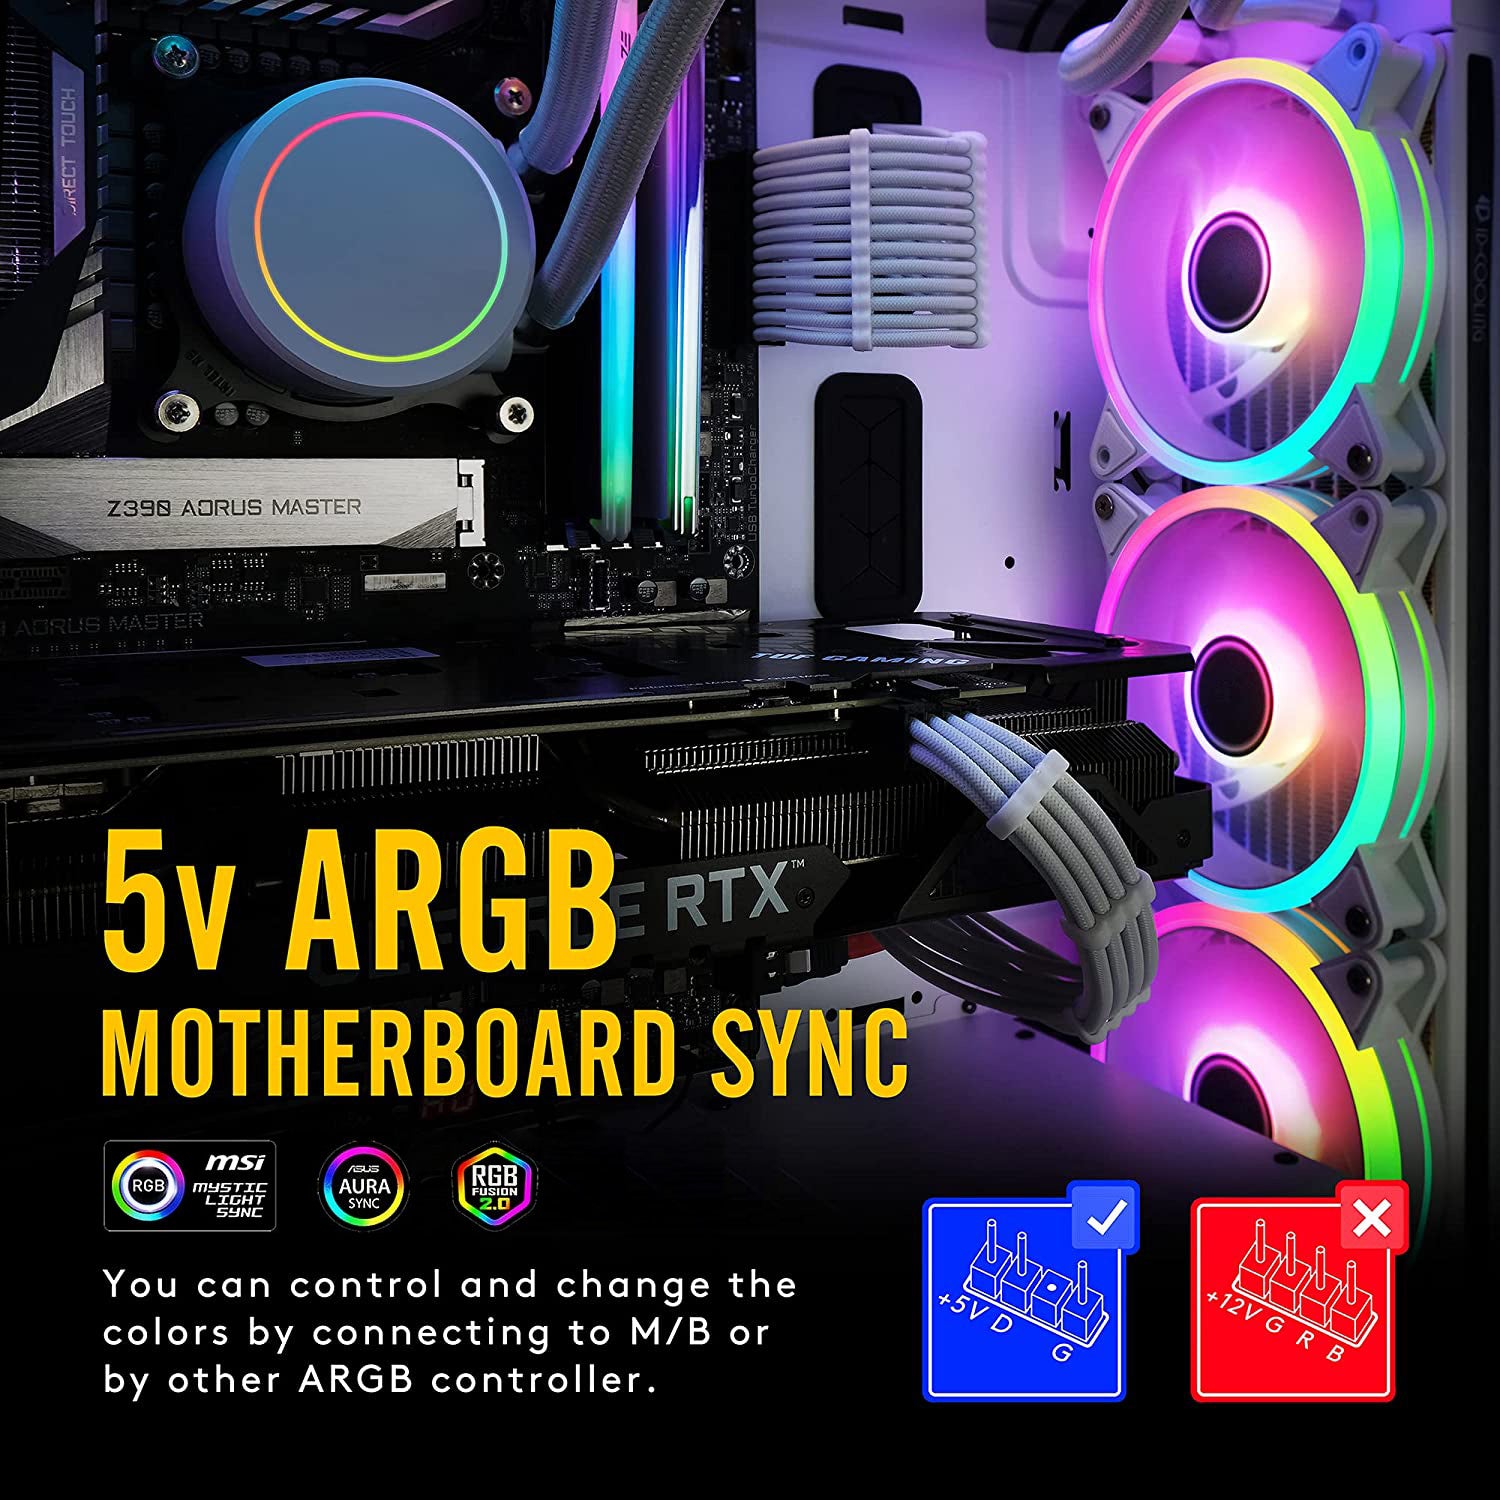 GTRACING ARGB CASE FANS (3 PACKS) - GTRACING